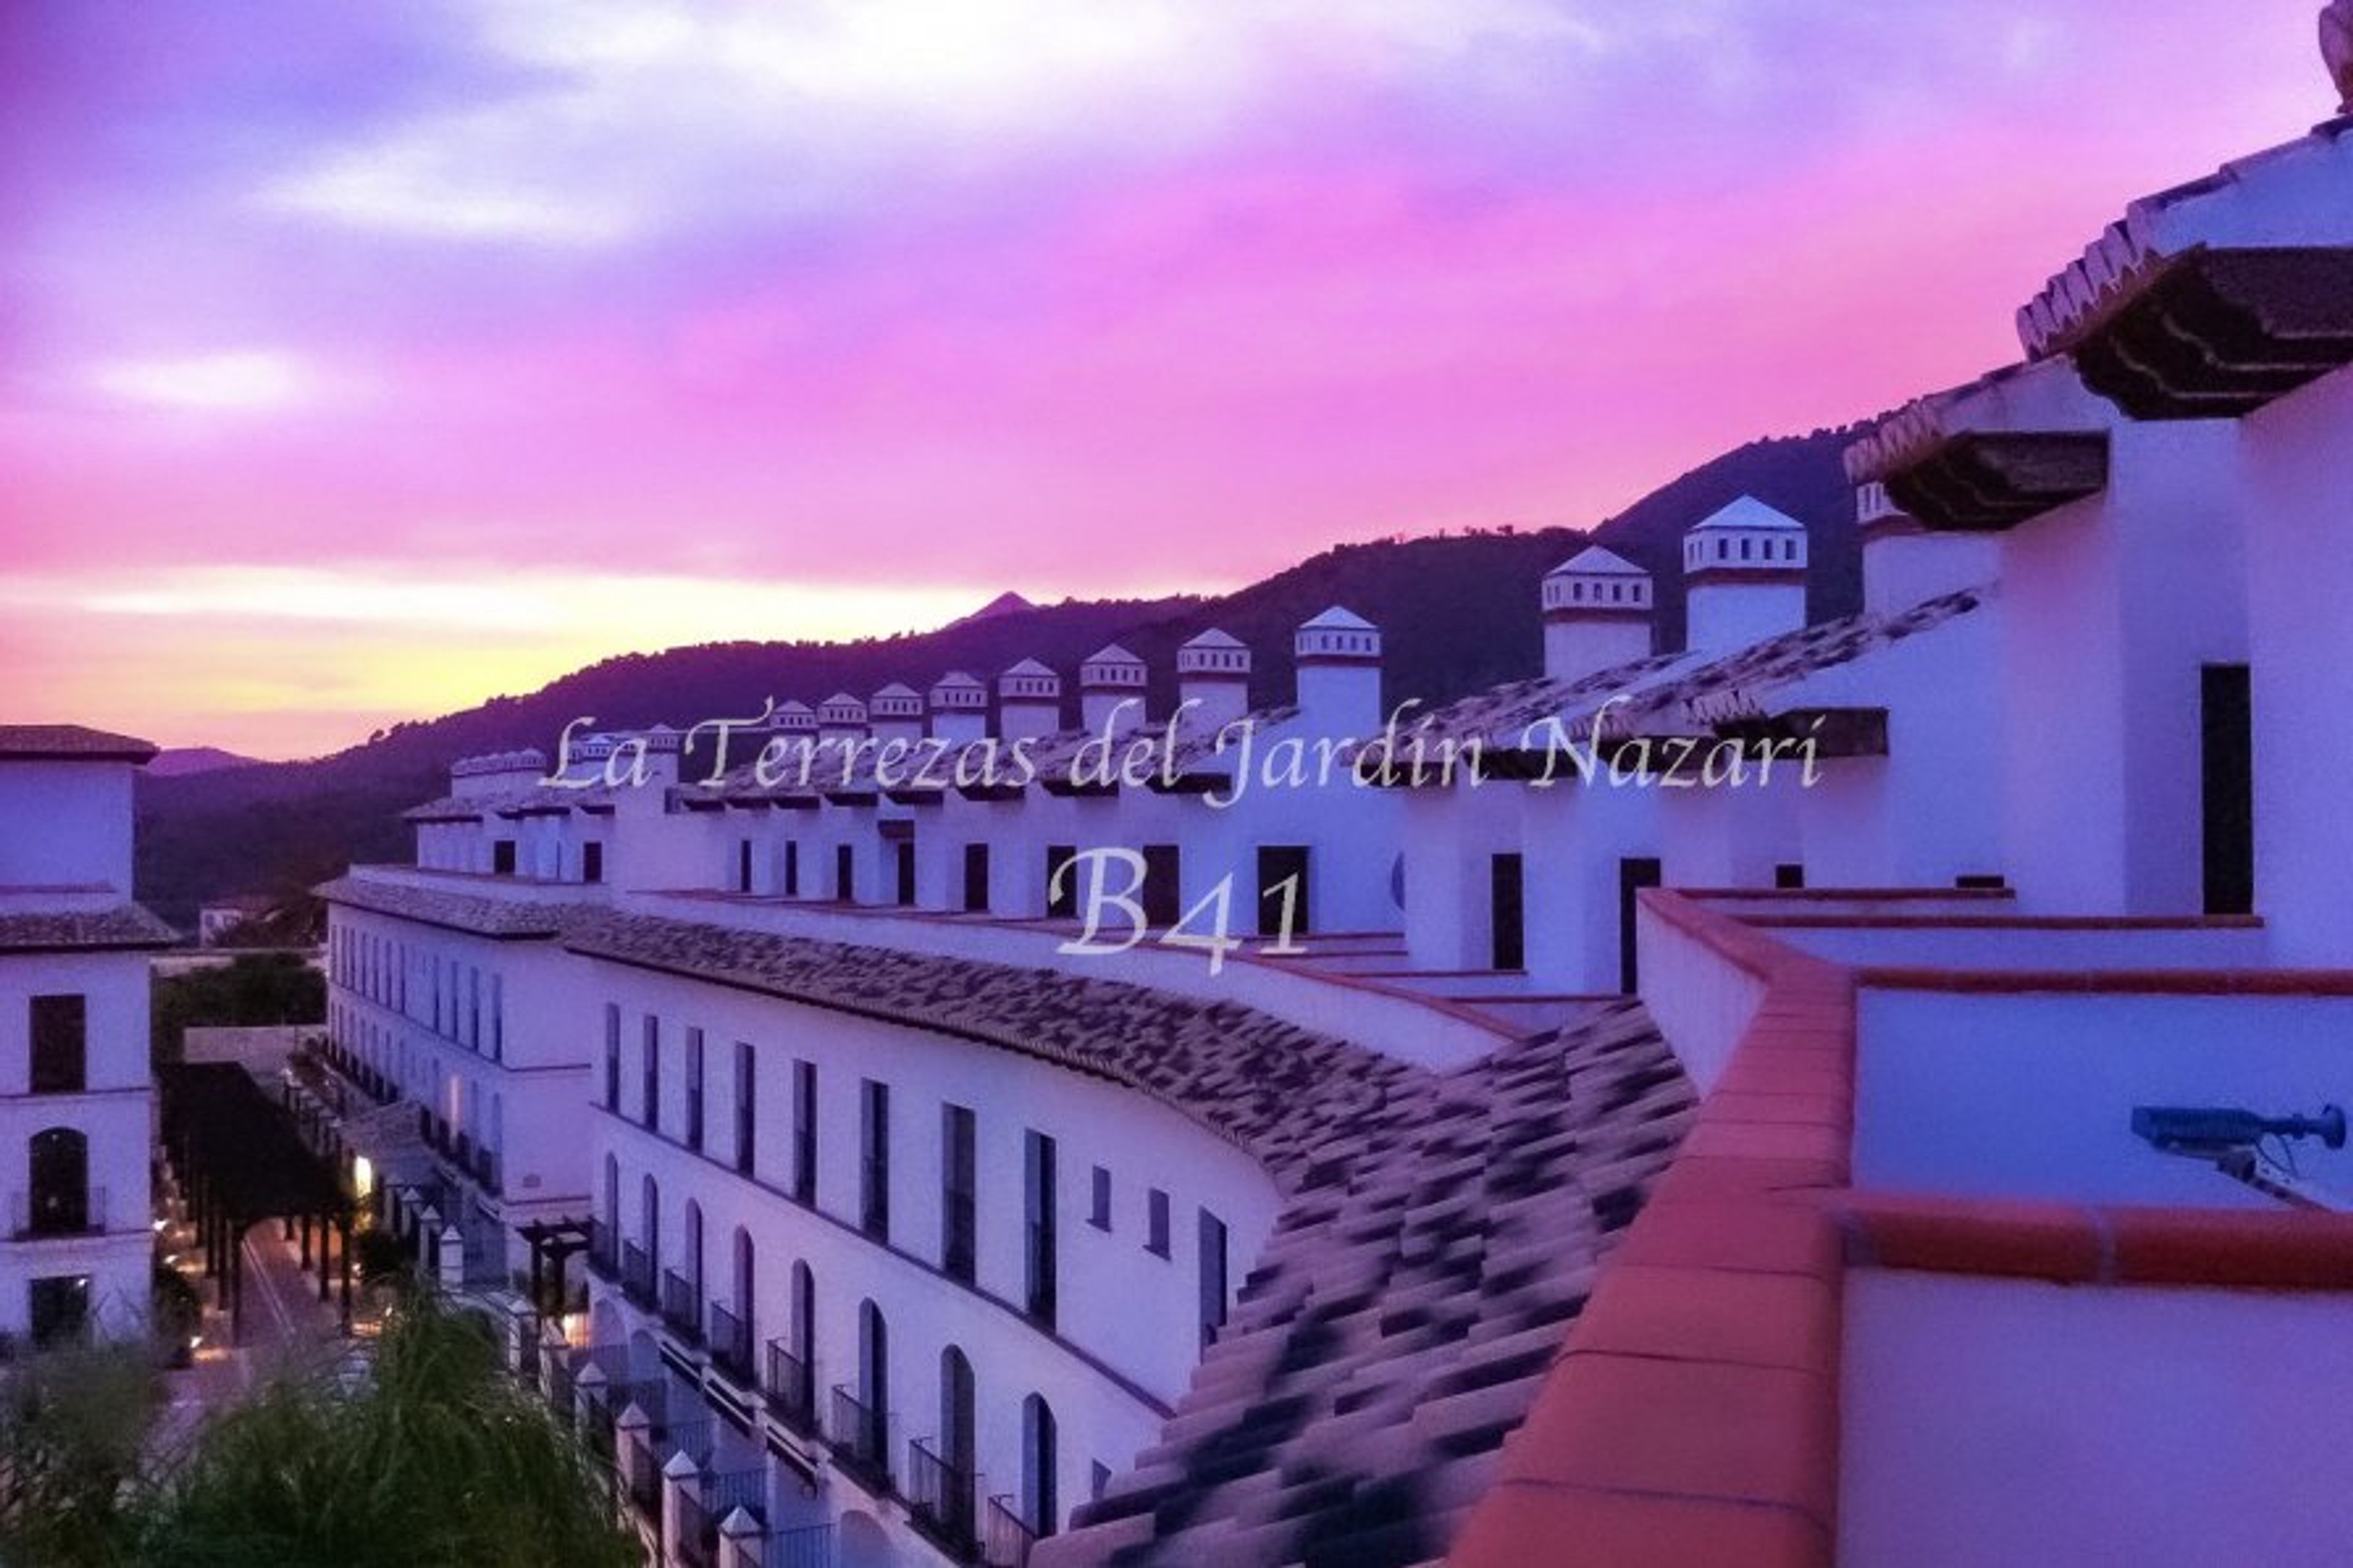  Granada has " the most beautiful sunset in the world" 
Bill Clinton